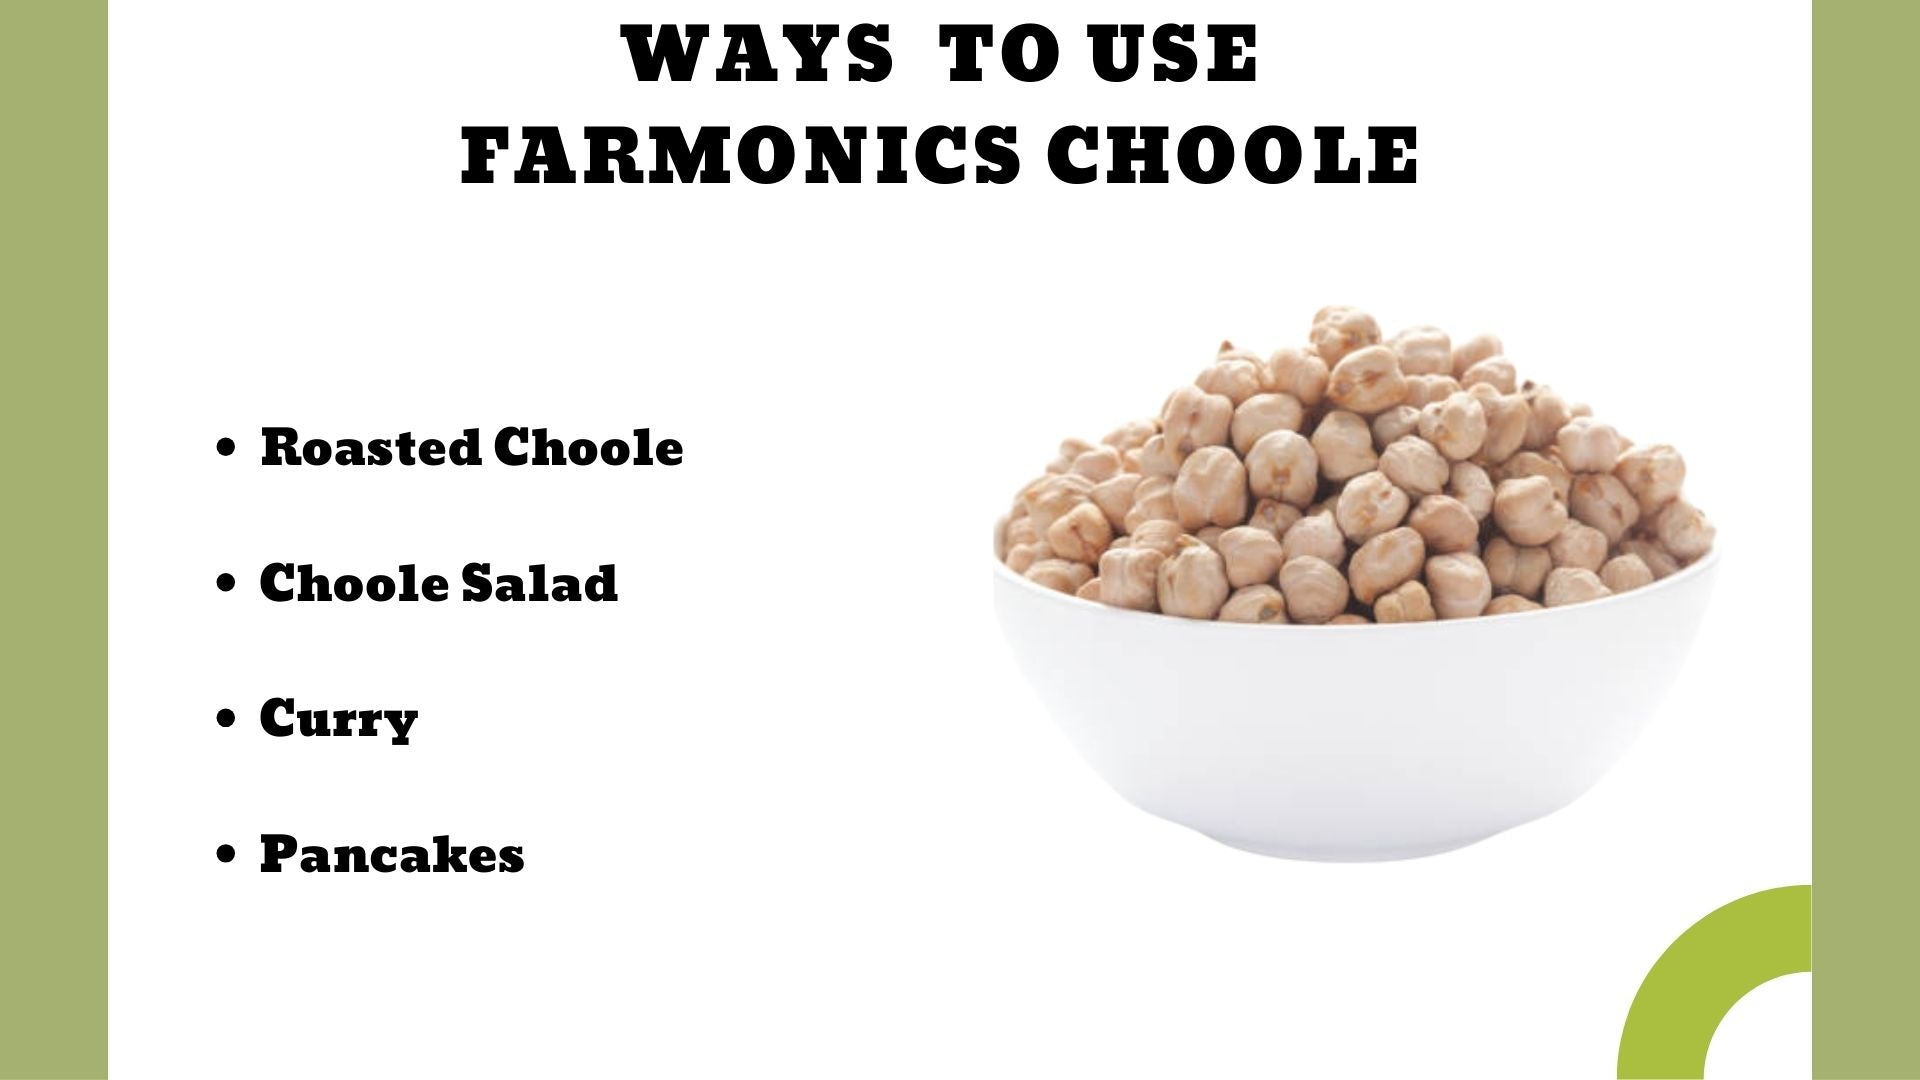 Here are the list of ways in which you can enjoy premium quality farmonics choole